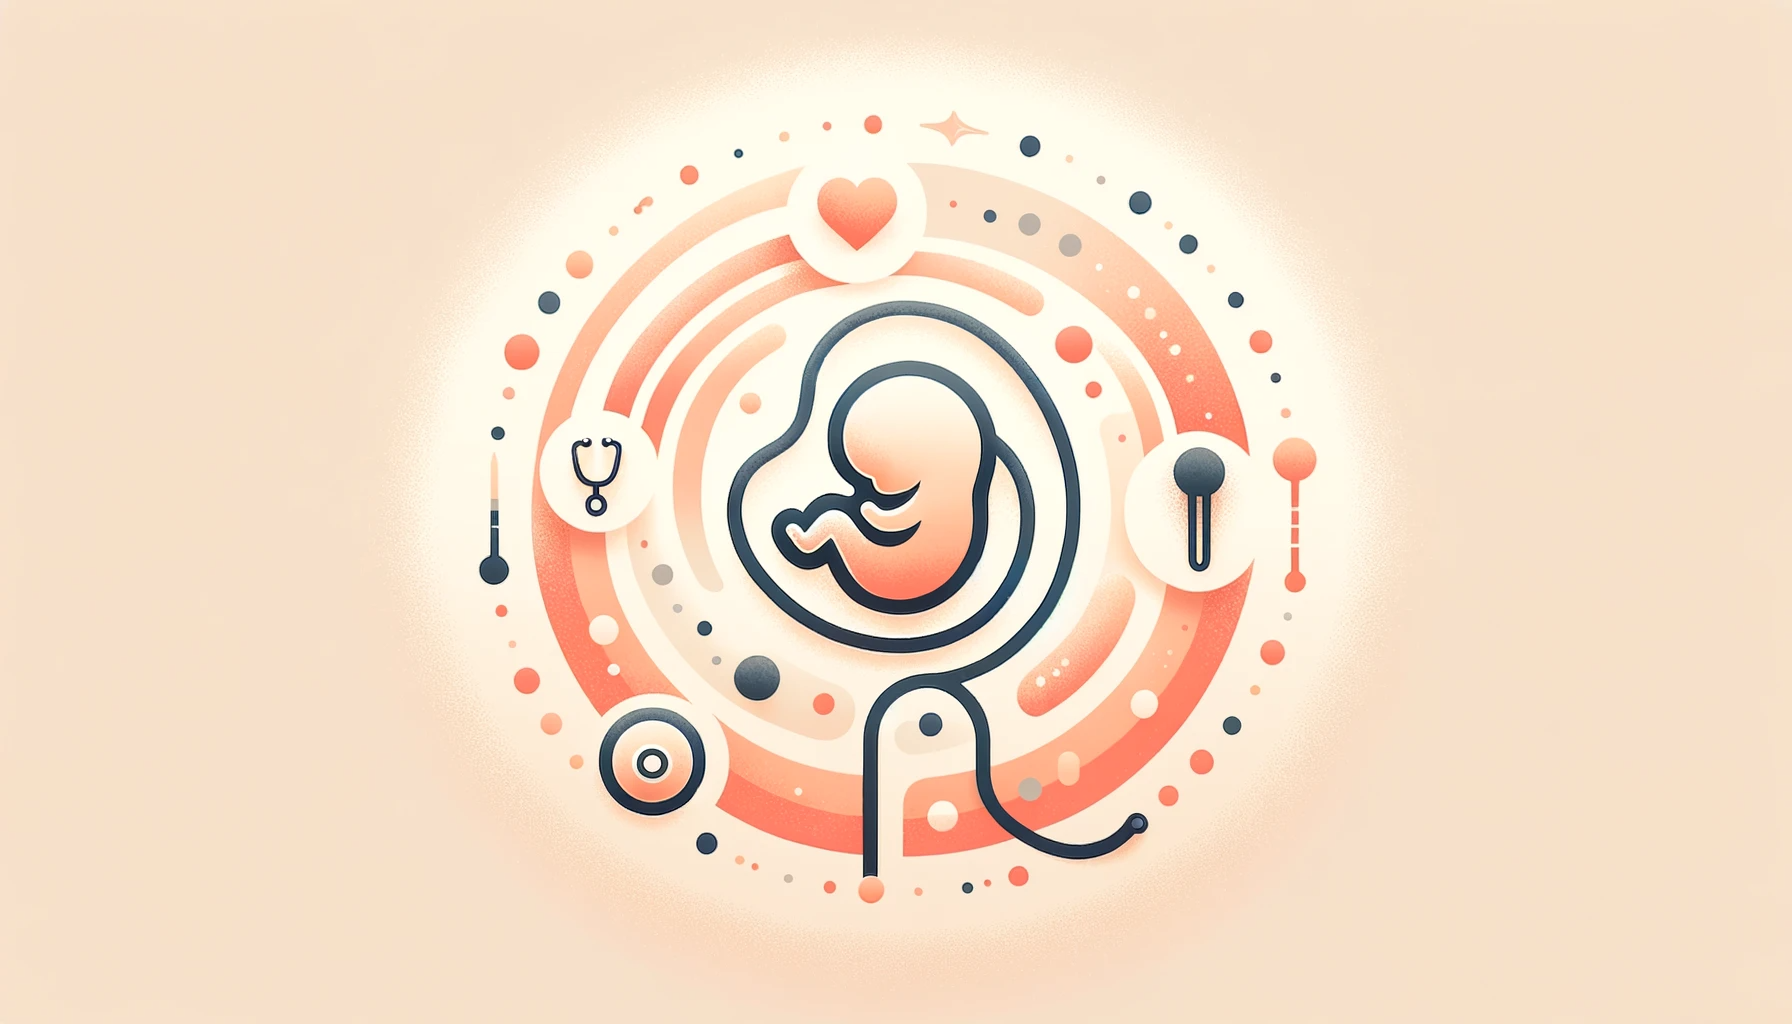 Abstract Prenatal Care Illustration for London Pregnancy Clinic blog - A minimalist design with a soft palette of light orange and baby pink, featuring an abstract fetus surrounded by prenatal care symbols such as a stethoscope and heart, conveying a sense of protection, growth, and tranquility for expectant mothers.